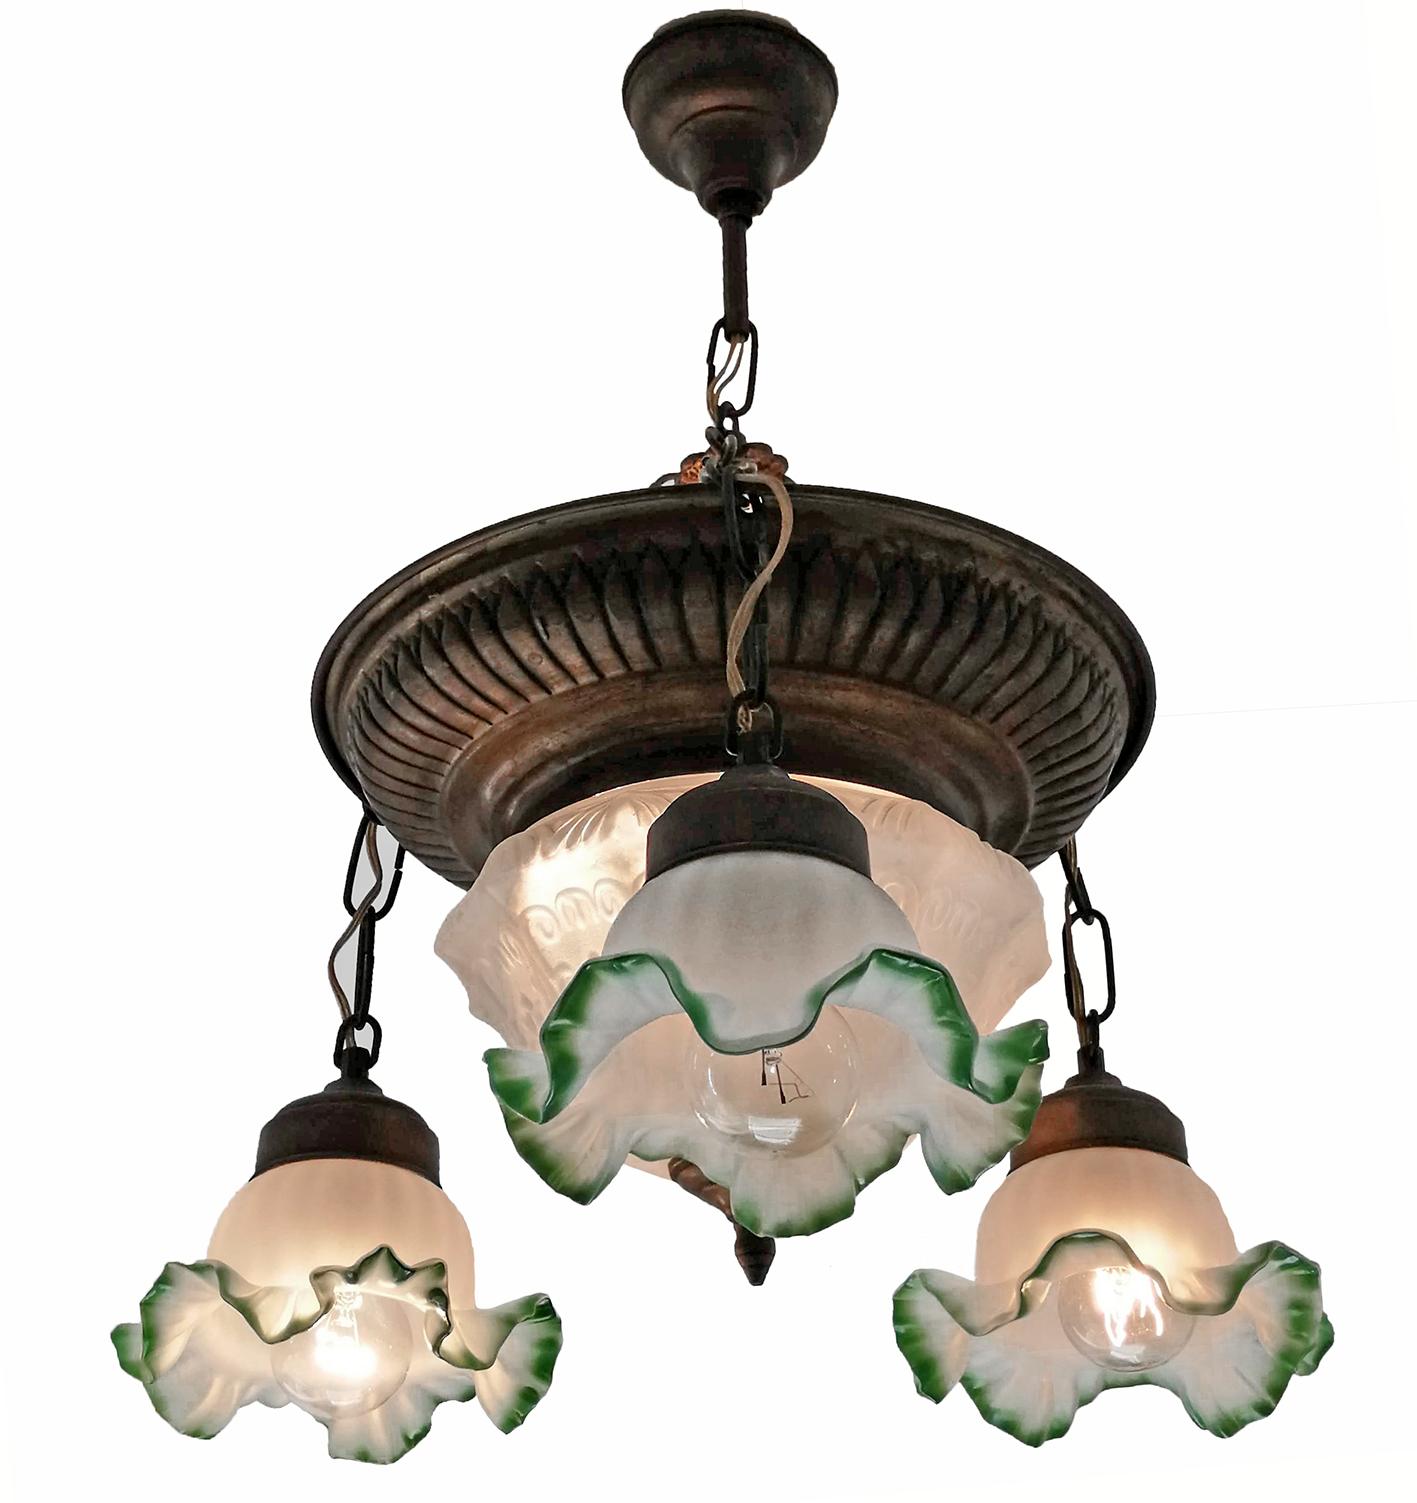 Antique French Art Deco and Art Nouveau Fogged Green Glass 5-Light Chandelier In Good Condition For Sale In Coimbra, PT